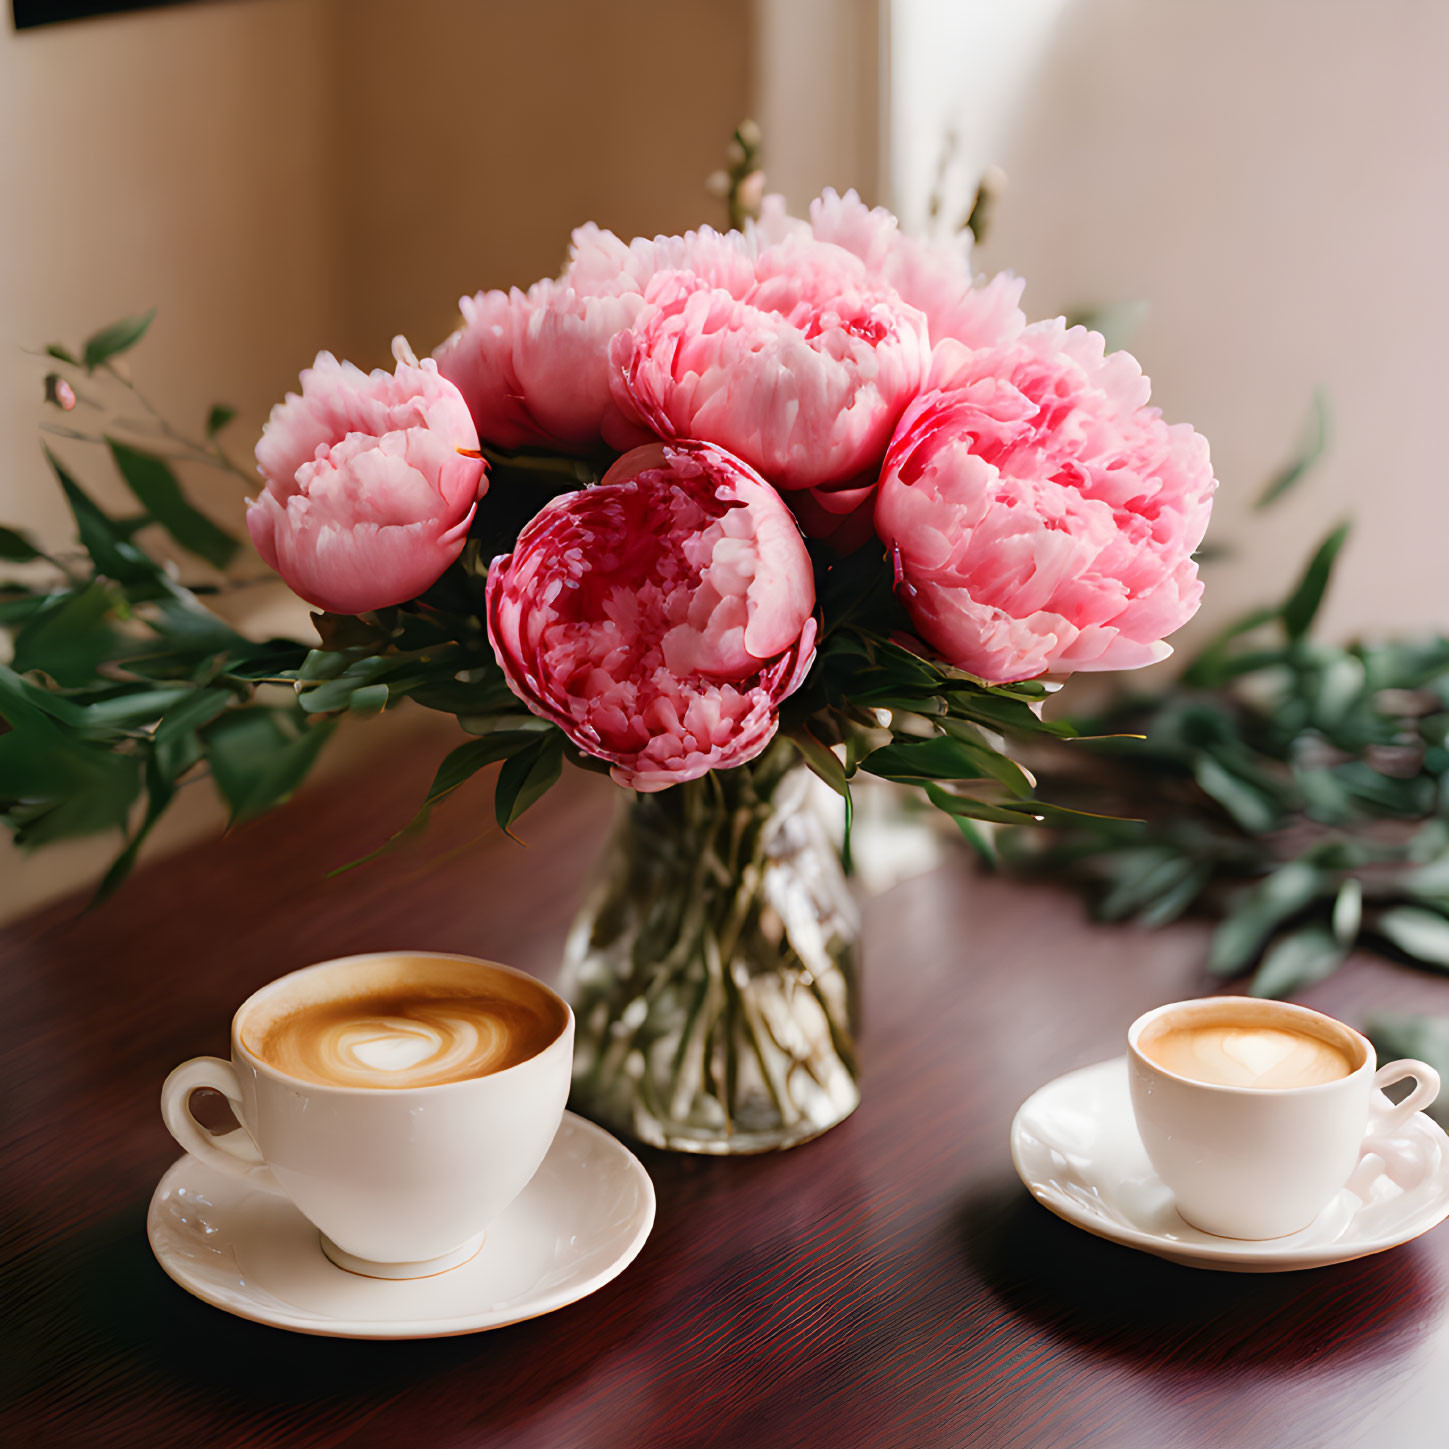 Pink peonies bouquet with cappuccino cups on table